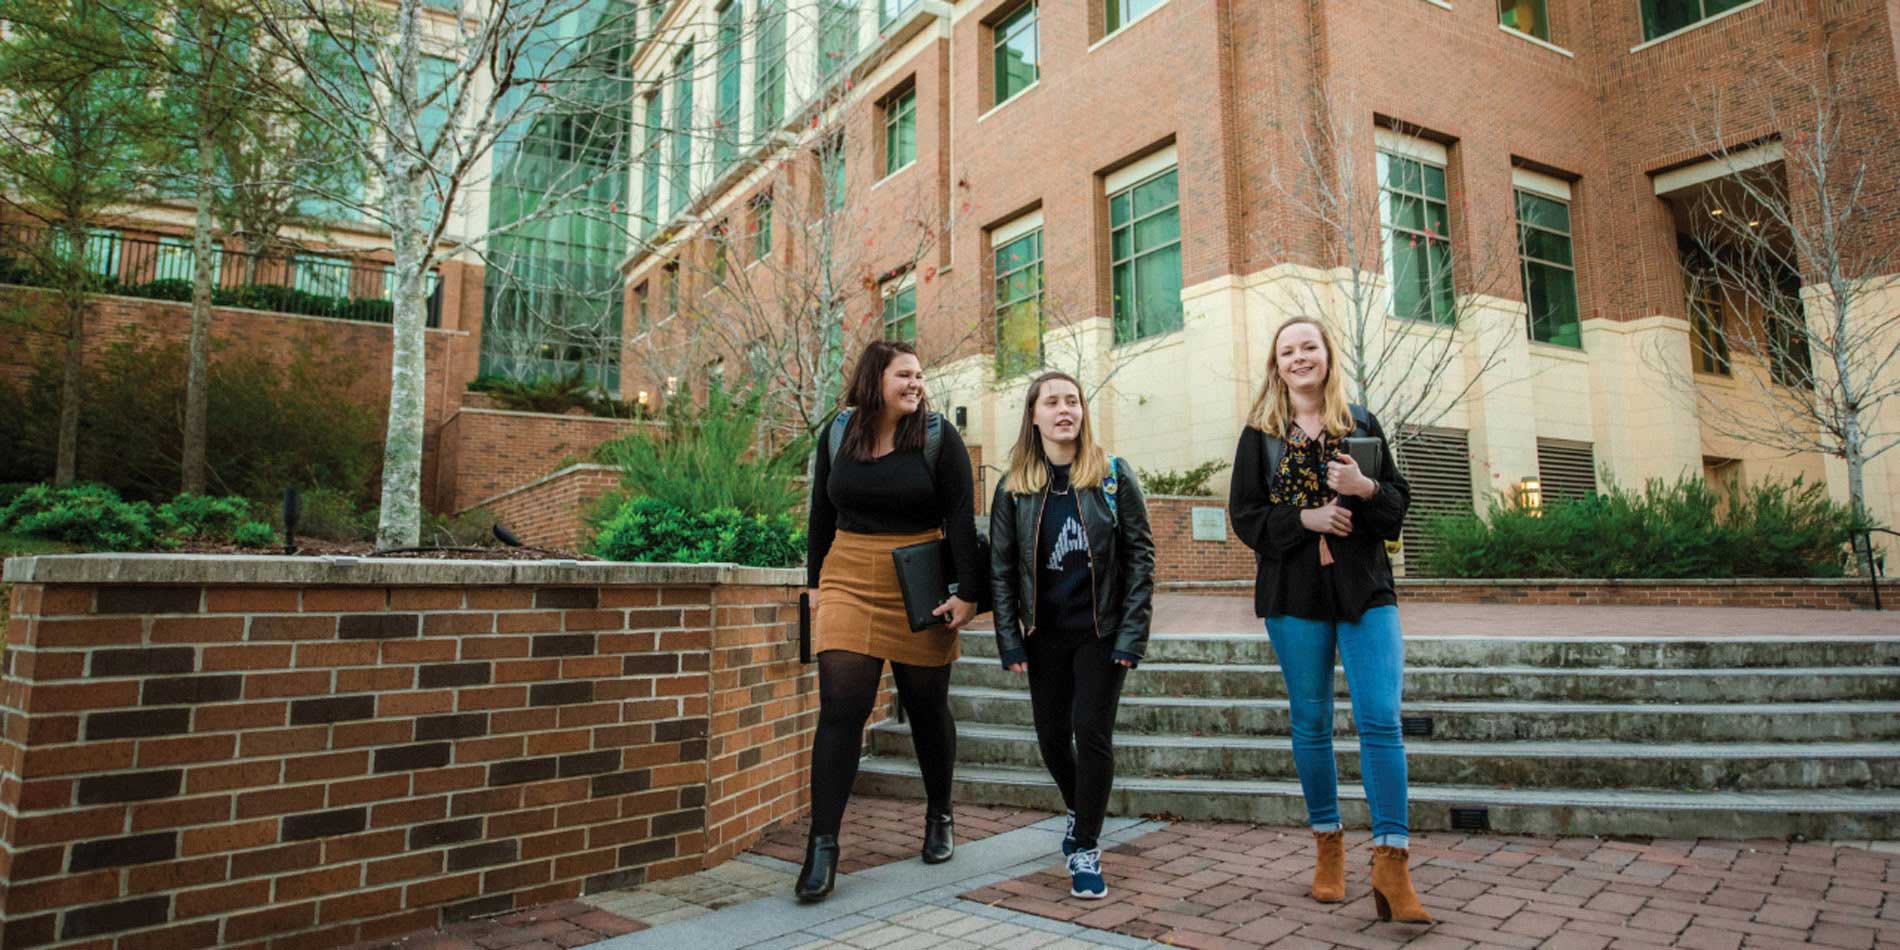 Three Watson students holding a portfolio walking down a staircase outside of a building